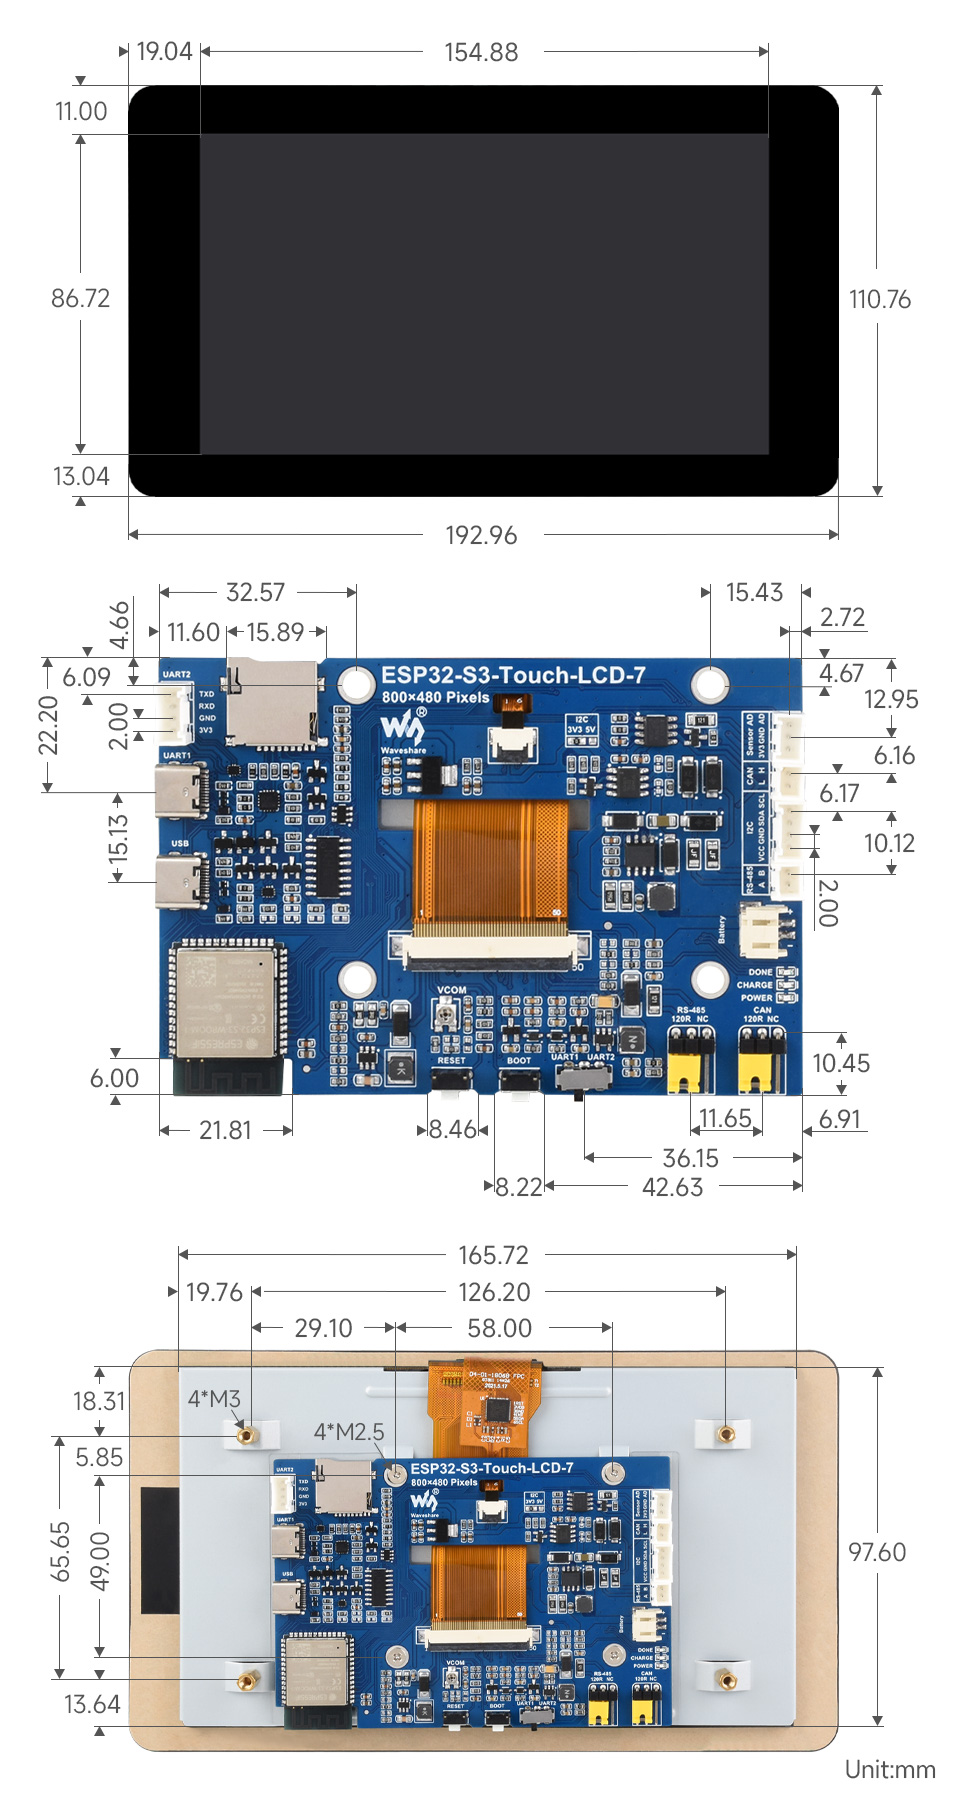 ESP32-S3 7inch touch display development board, outline dimensions